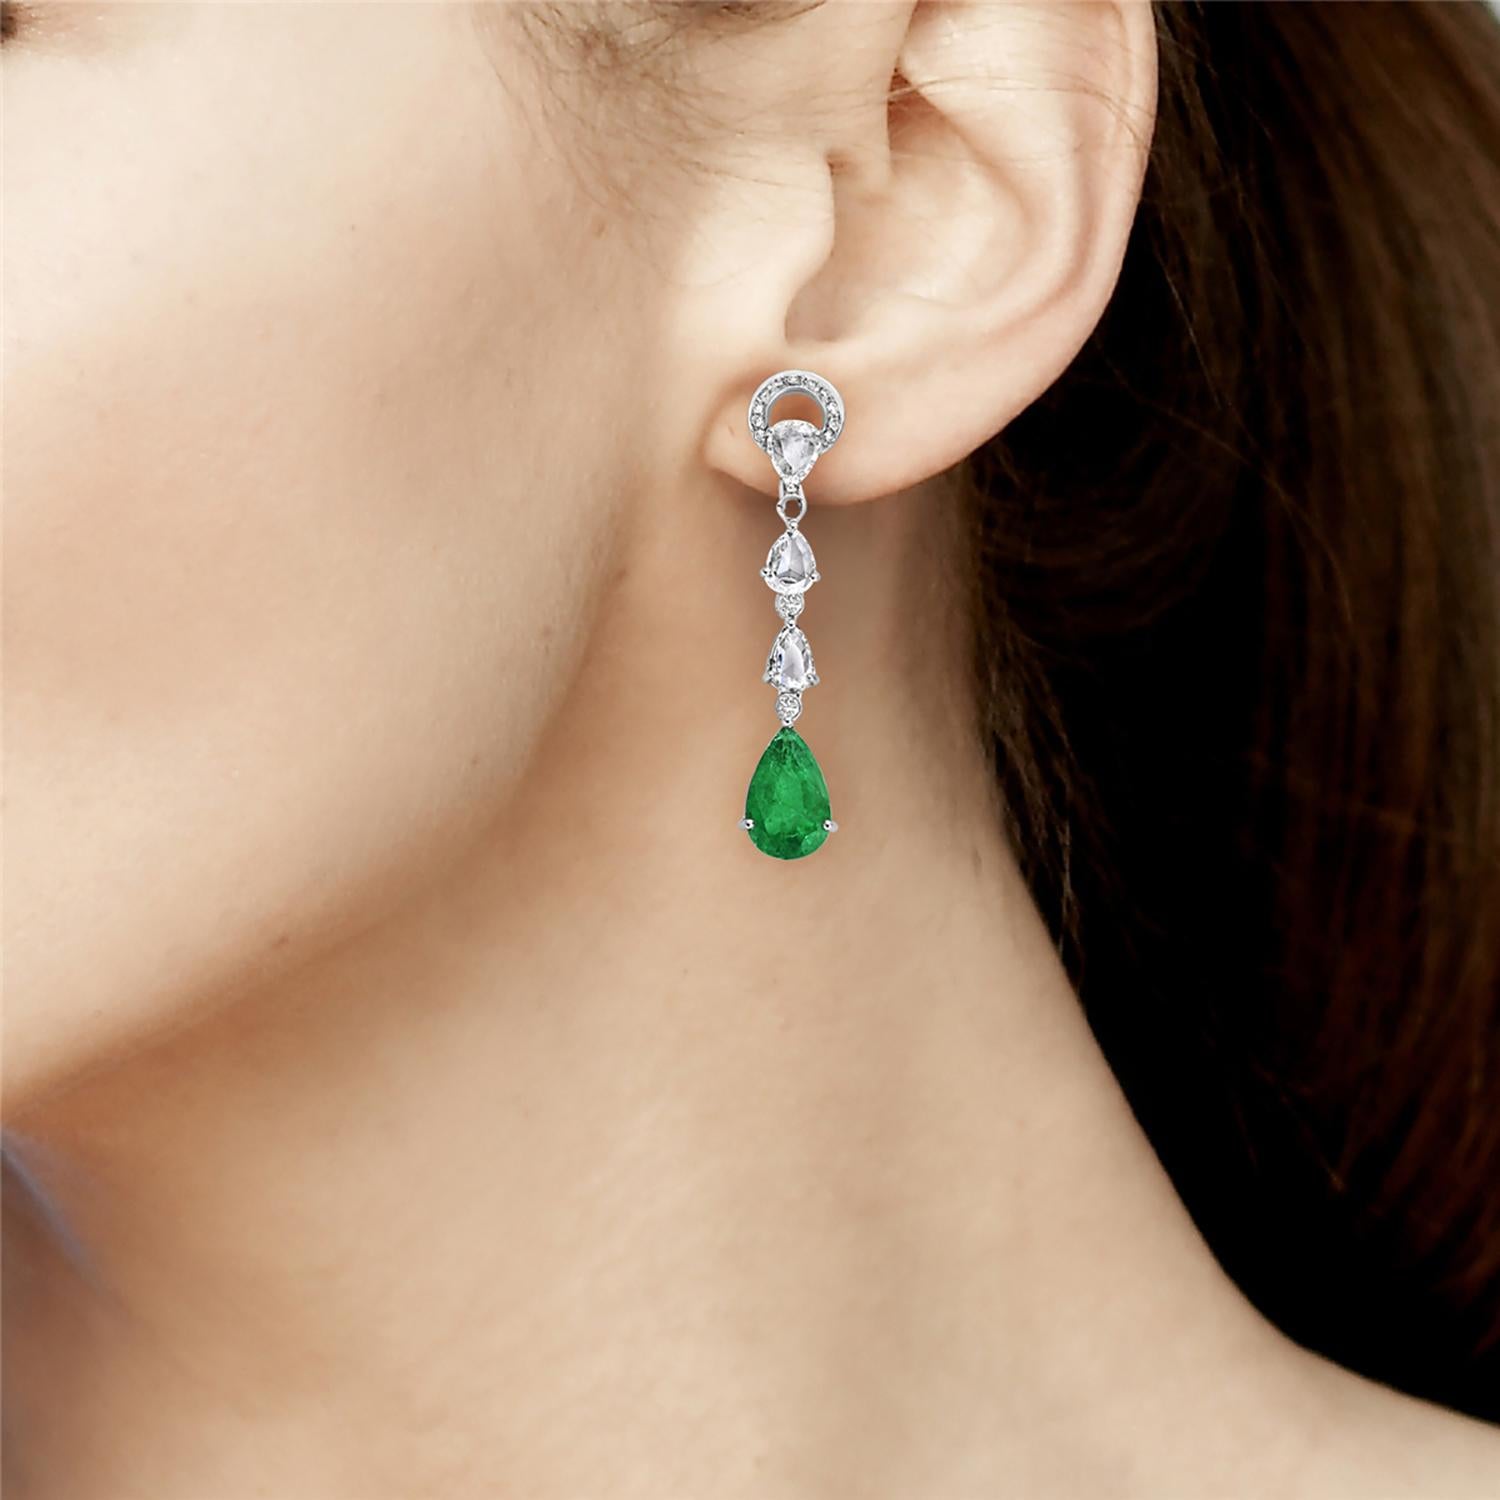 Add a touch of elegance to your outfit with these stunning drop-shaped emerald earrings. These long earrings are perfect for special occasions or adding a touch of luxury to your everyday style. Crafted with the finest materials, these earrings are